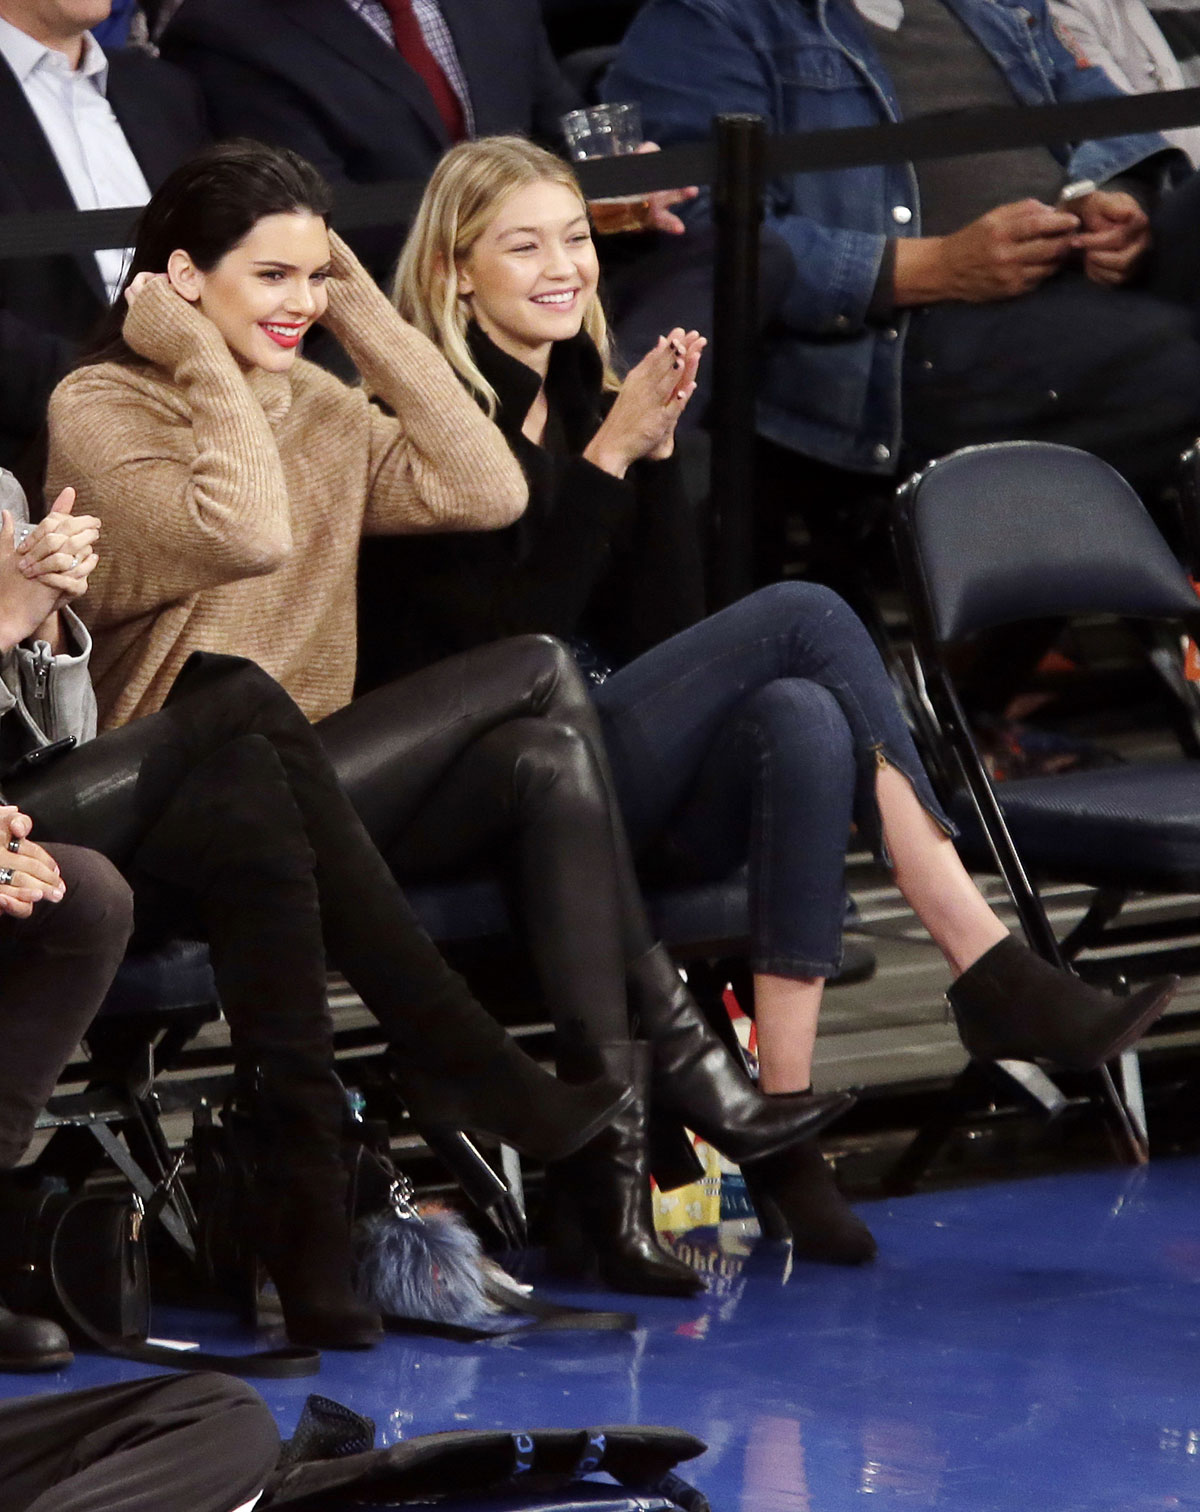 Kendall Jenner at the Knicks vs Wizards basketball game